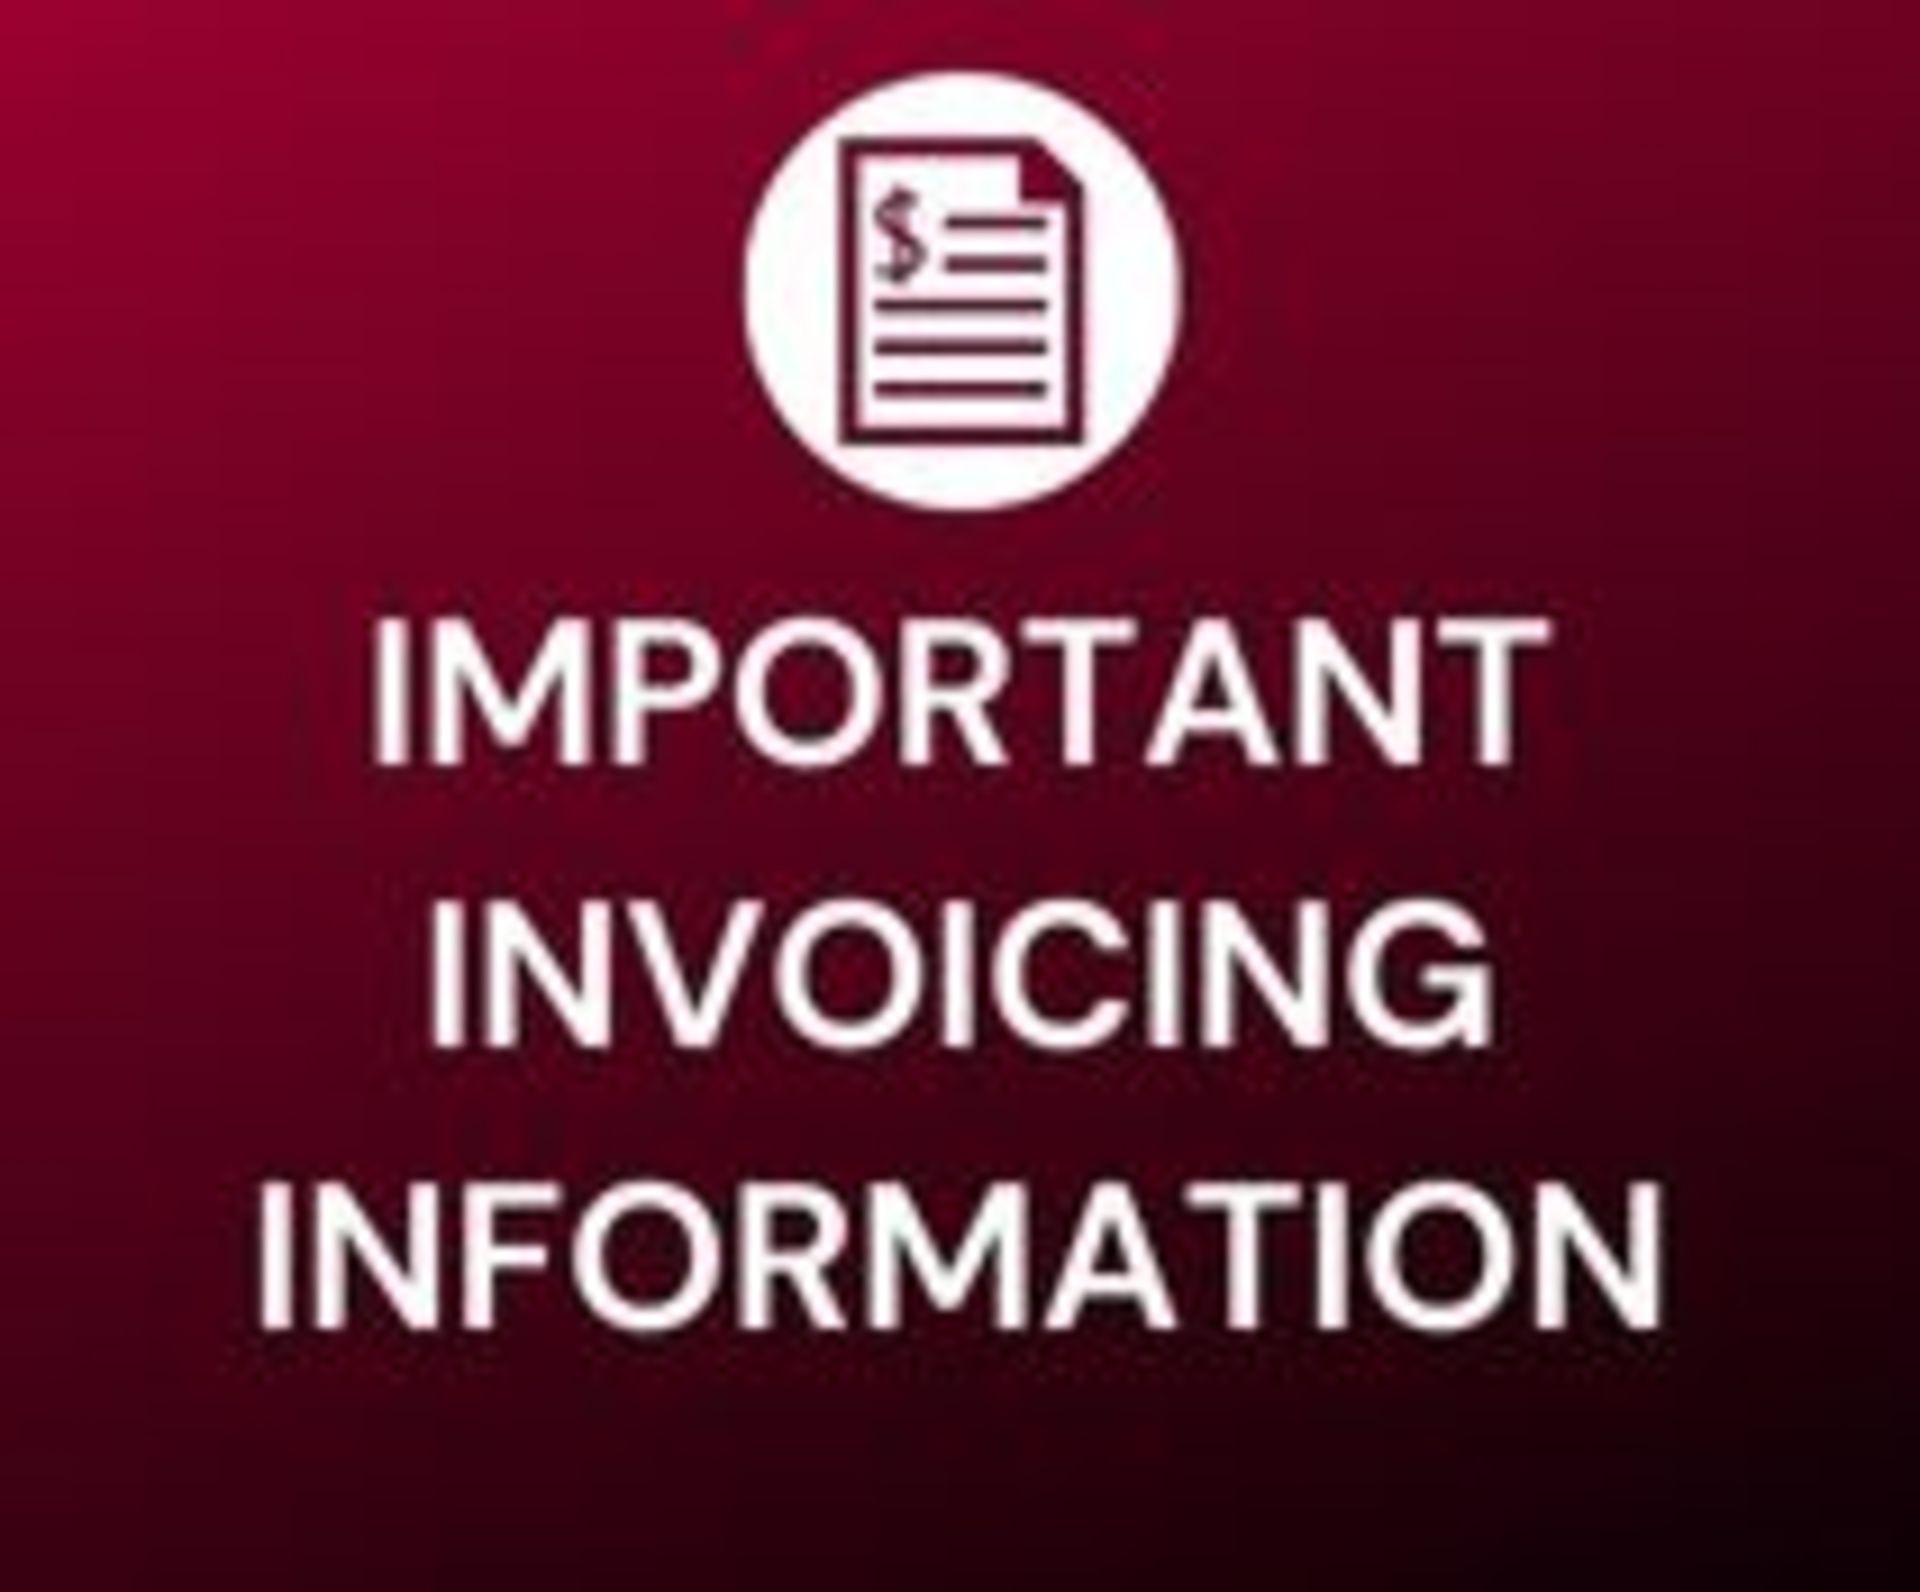 IMPORTANT PAYMENT/INVOICING INFORMATION